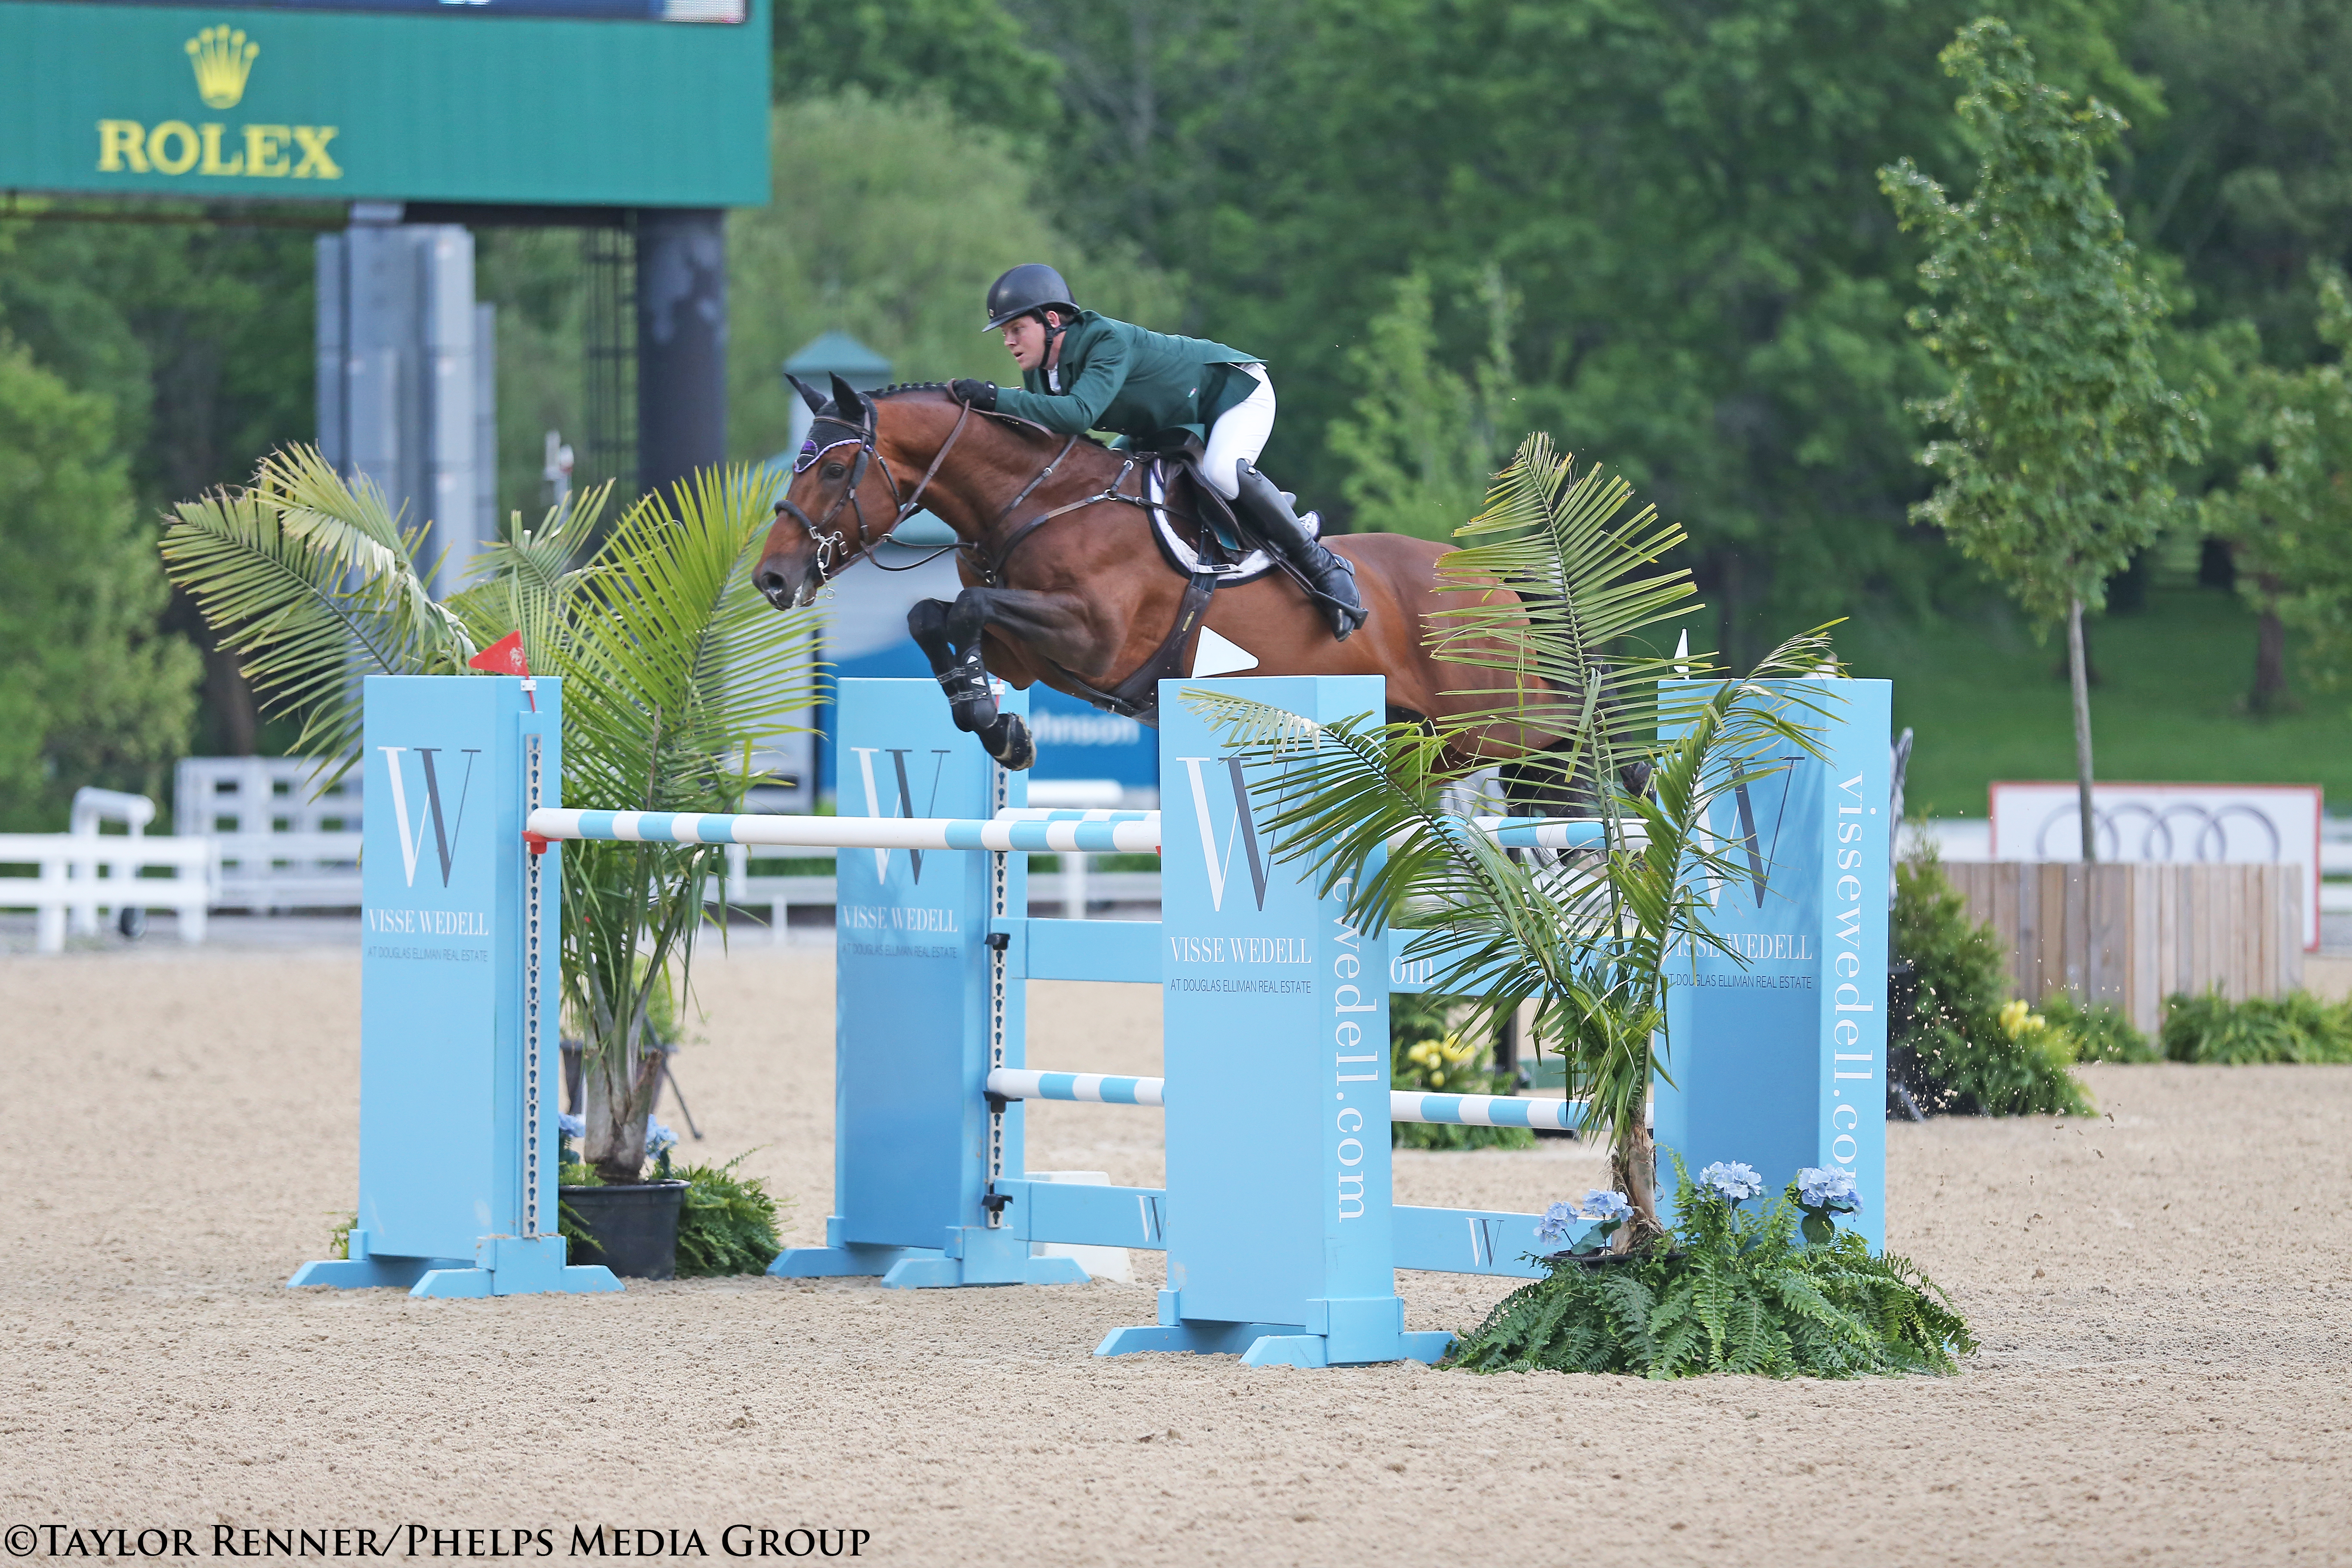 Shane Sweetnam and Chaqui Z